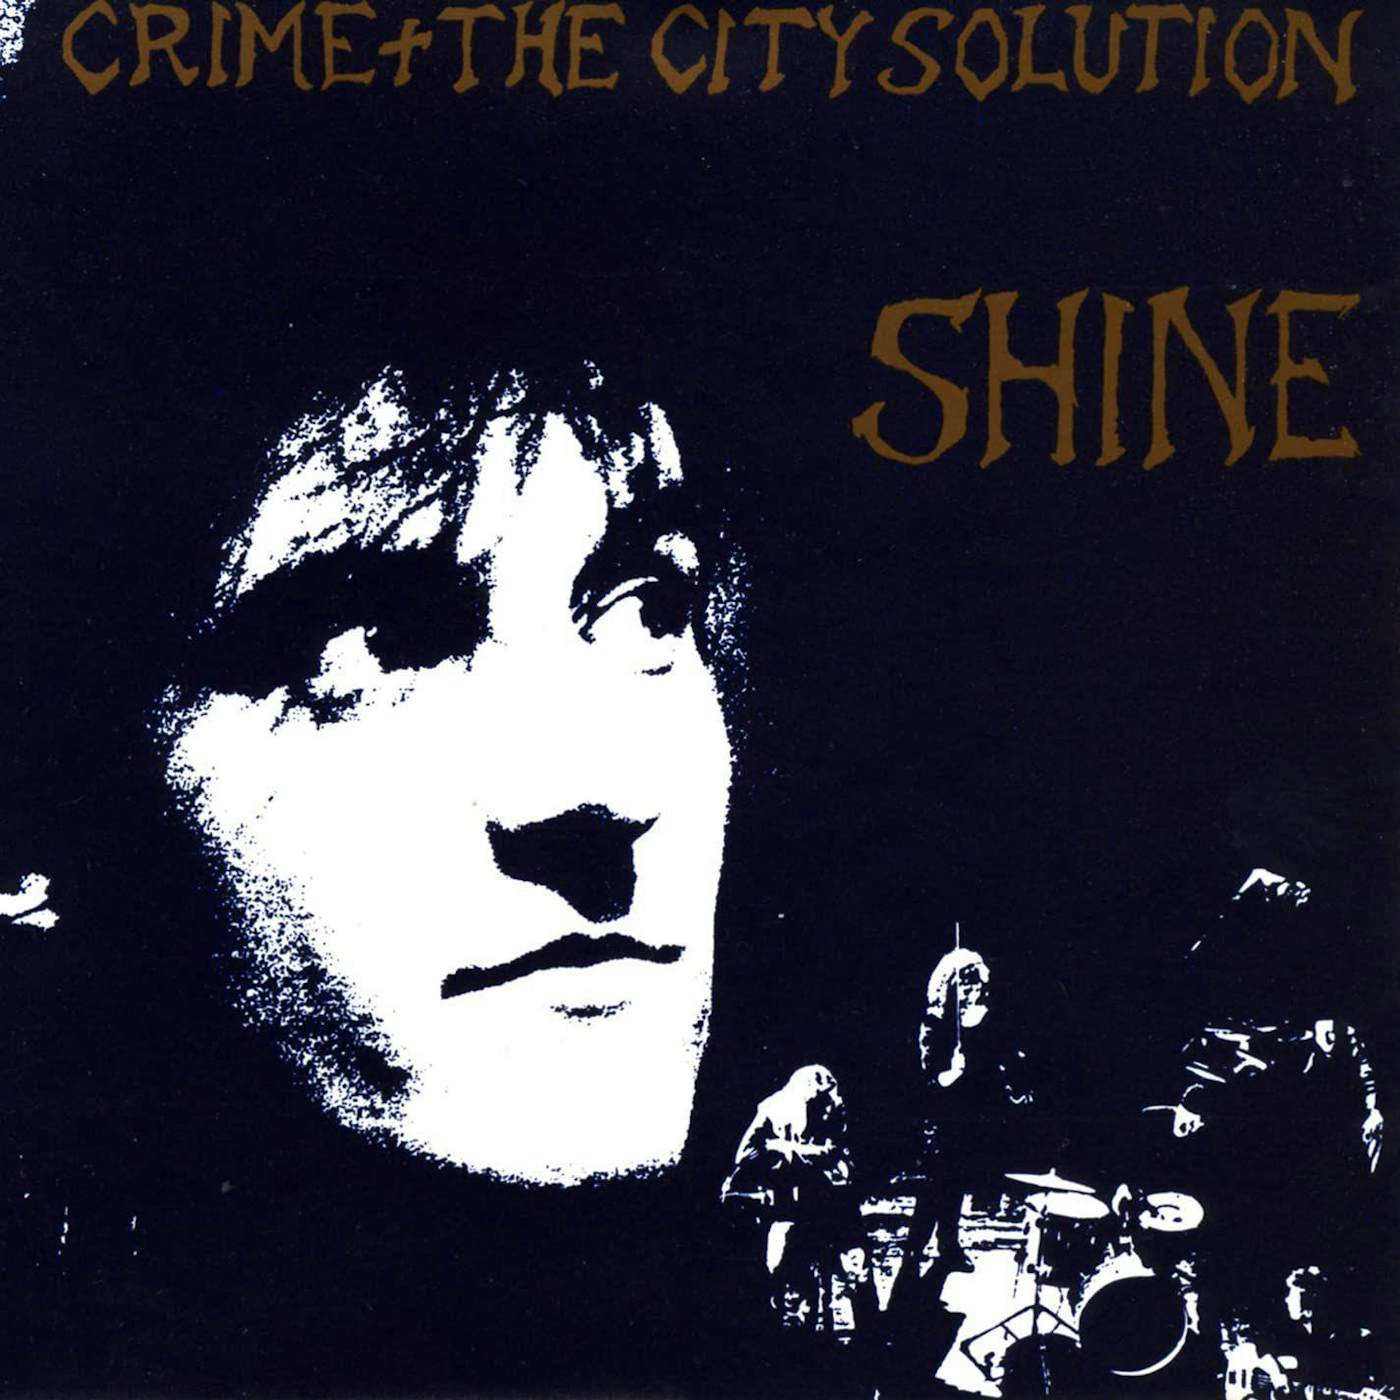 Crime & the City Solution Shine (Limited Edition/Gold) Vinyl Record